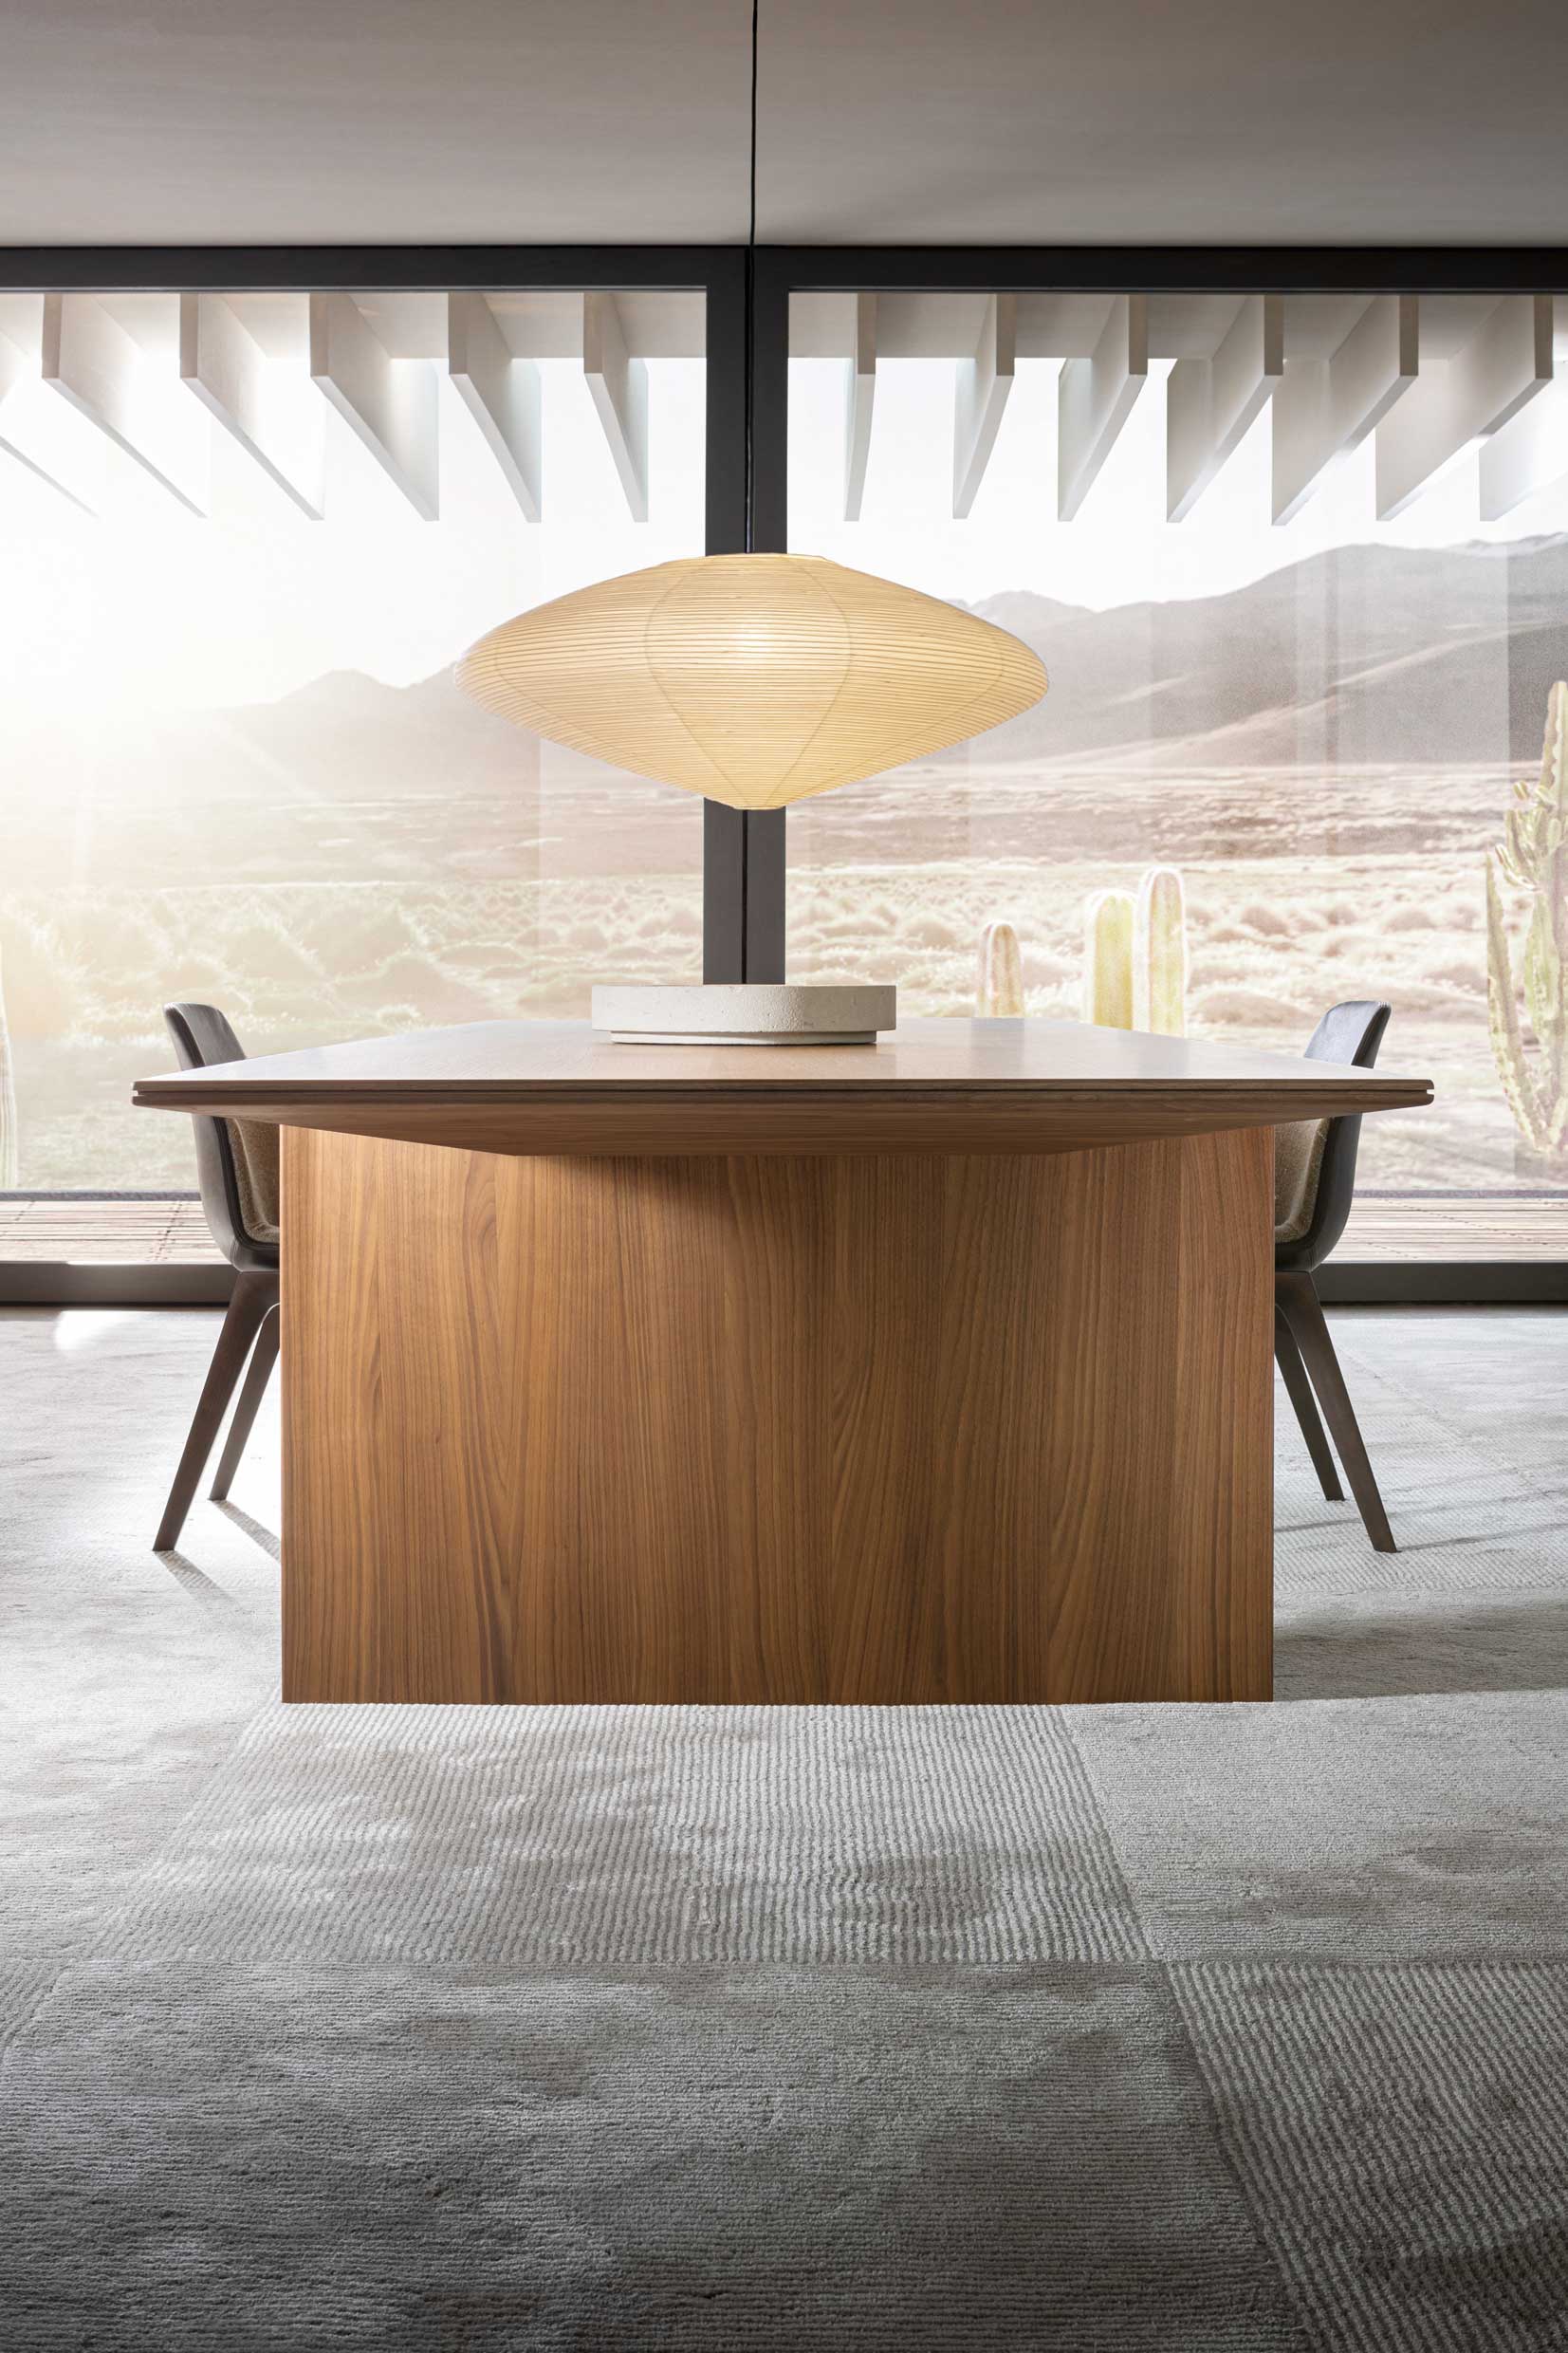 Ava table detail design foster & partners. luxury design table for dining rooms